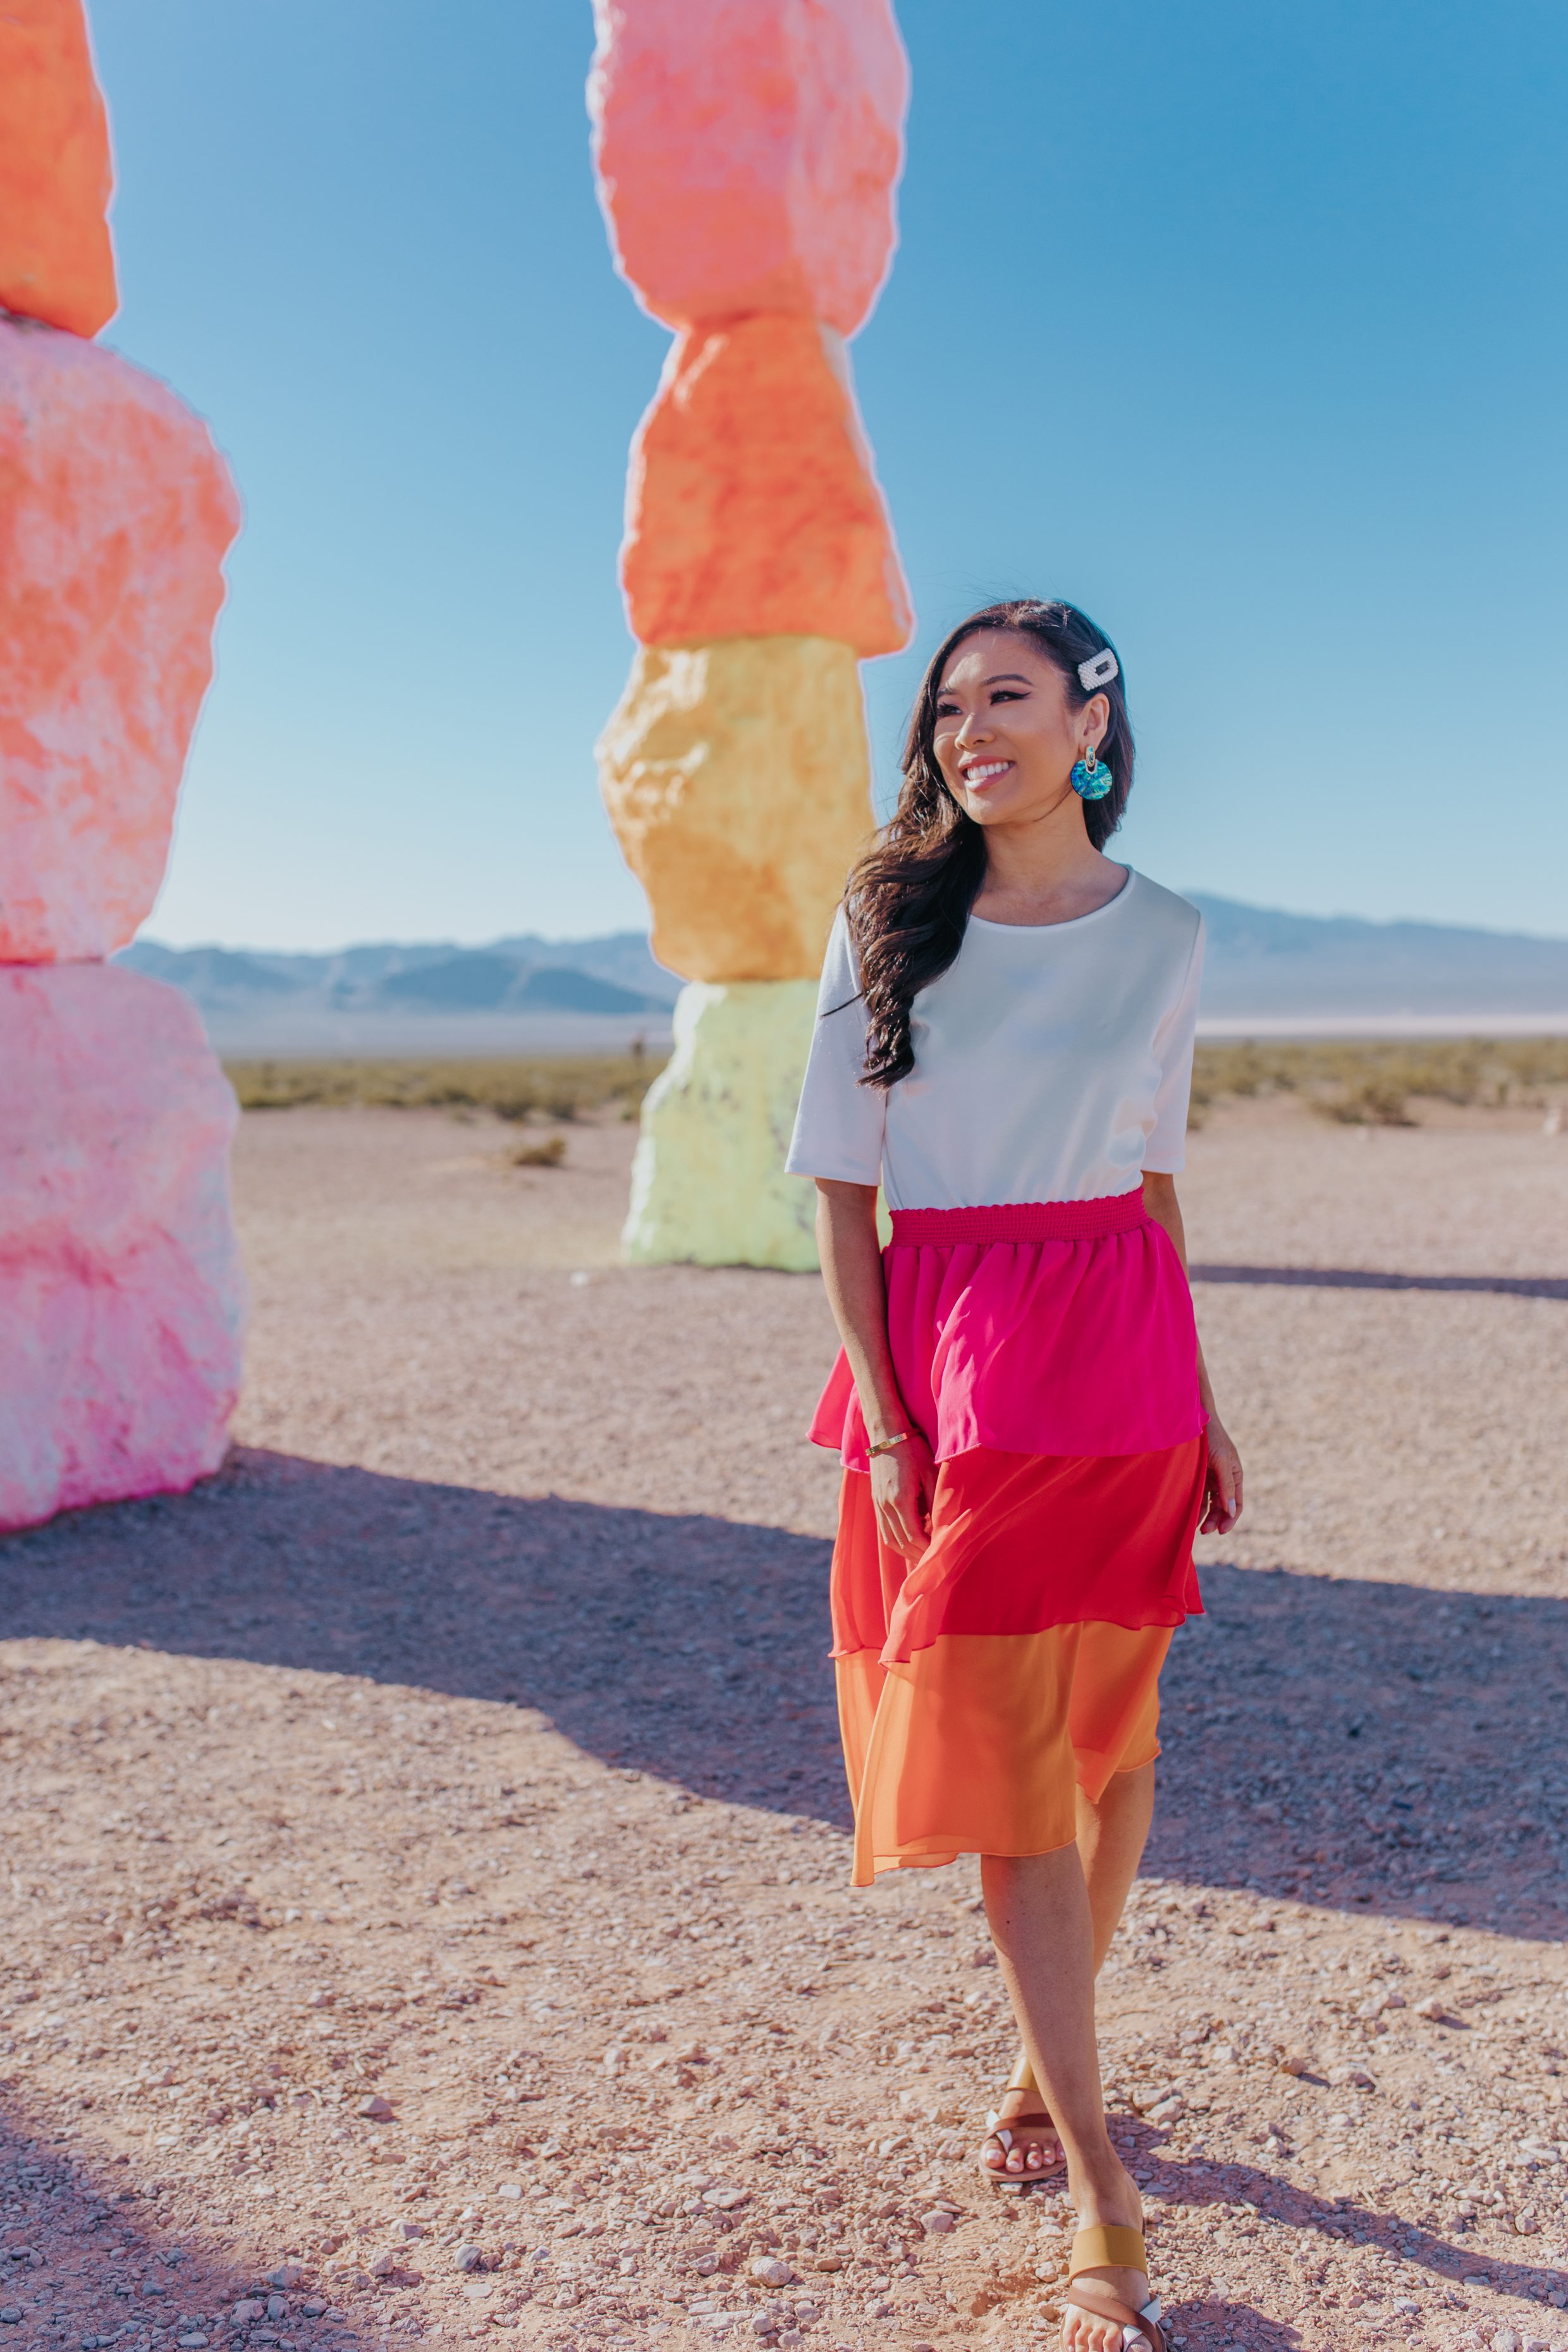 Hoang-Kim wears a white tee, colorful skirt and Dolce Vita Sandals at Seven Magic Mountains